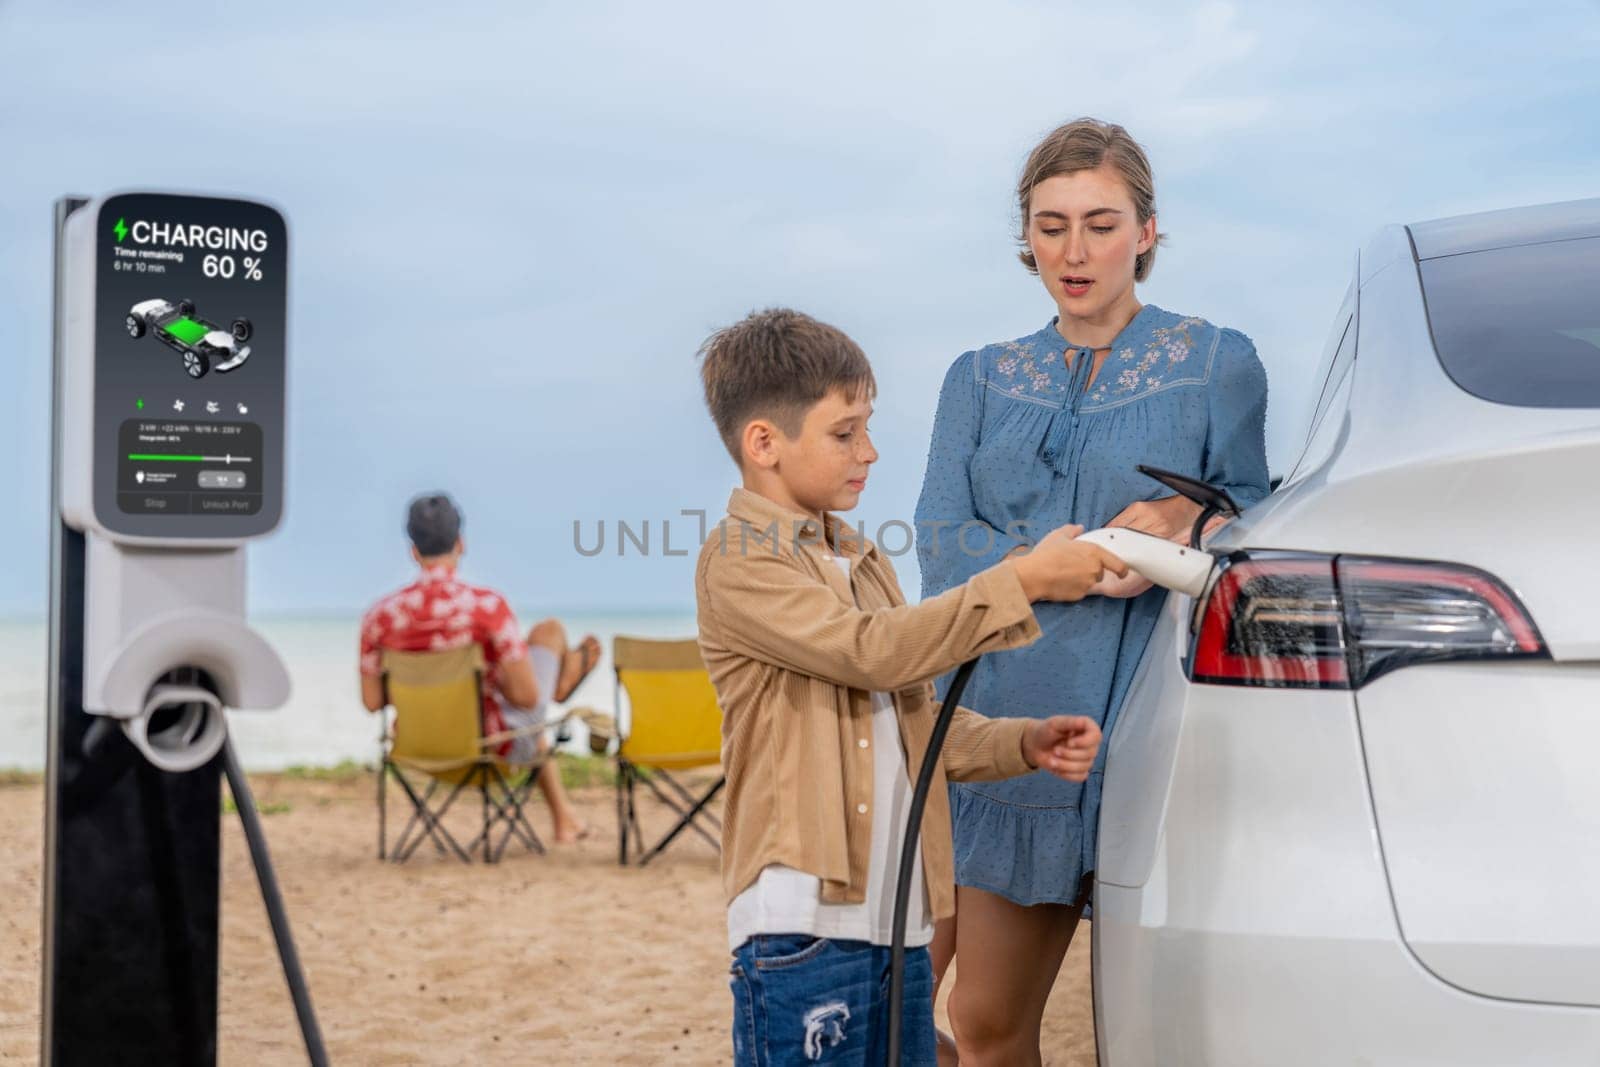 Family vacation trip traveling by the beach with electric car, lovely family recharge EV car with green and sustainable energy. Seascape travel and eco-friendly car for clean environment. Perpetual